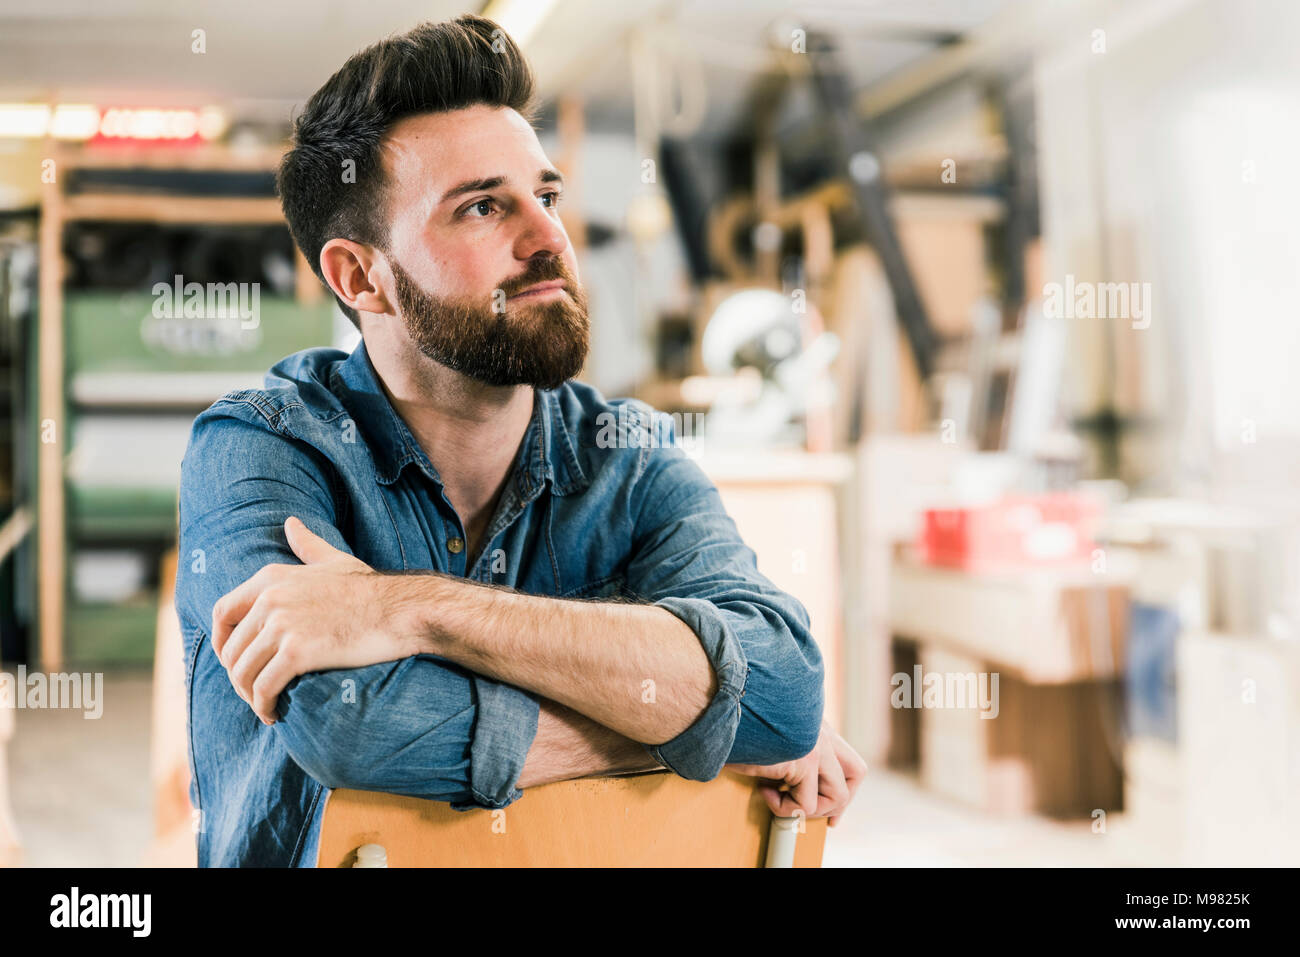 Man sitting on chair in workshop Stock Photo